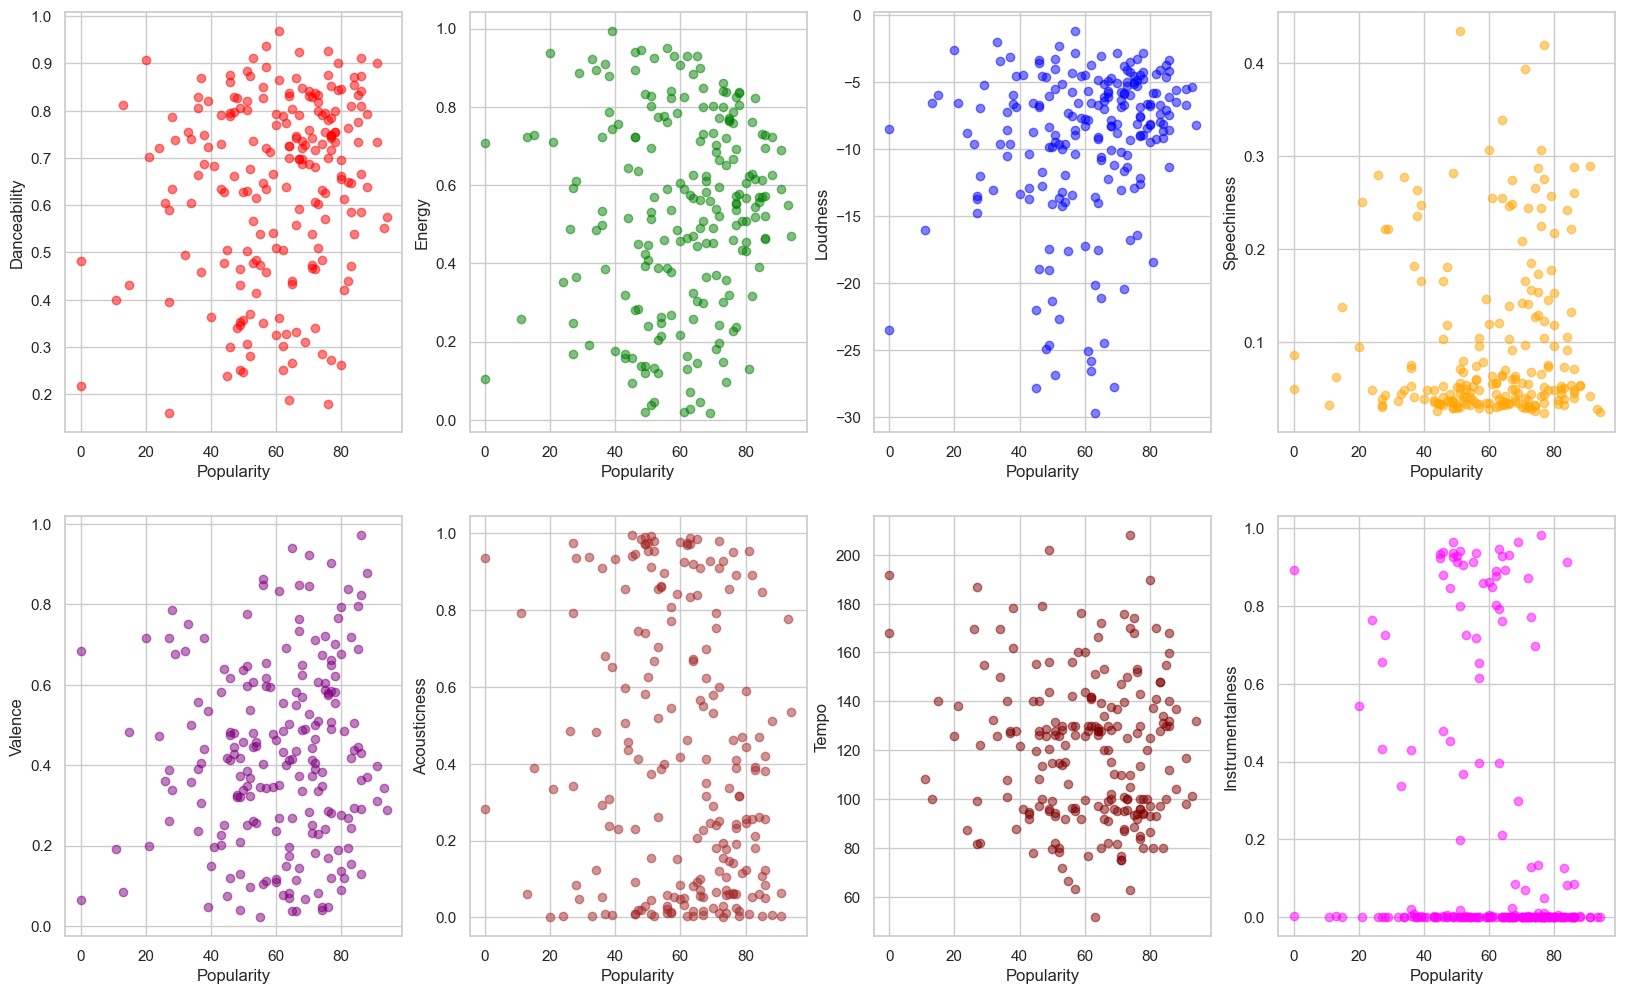 Scatter plots of popularity against other features